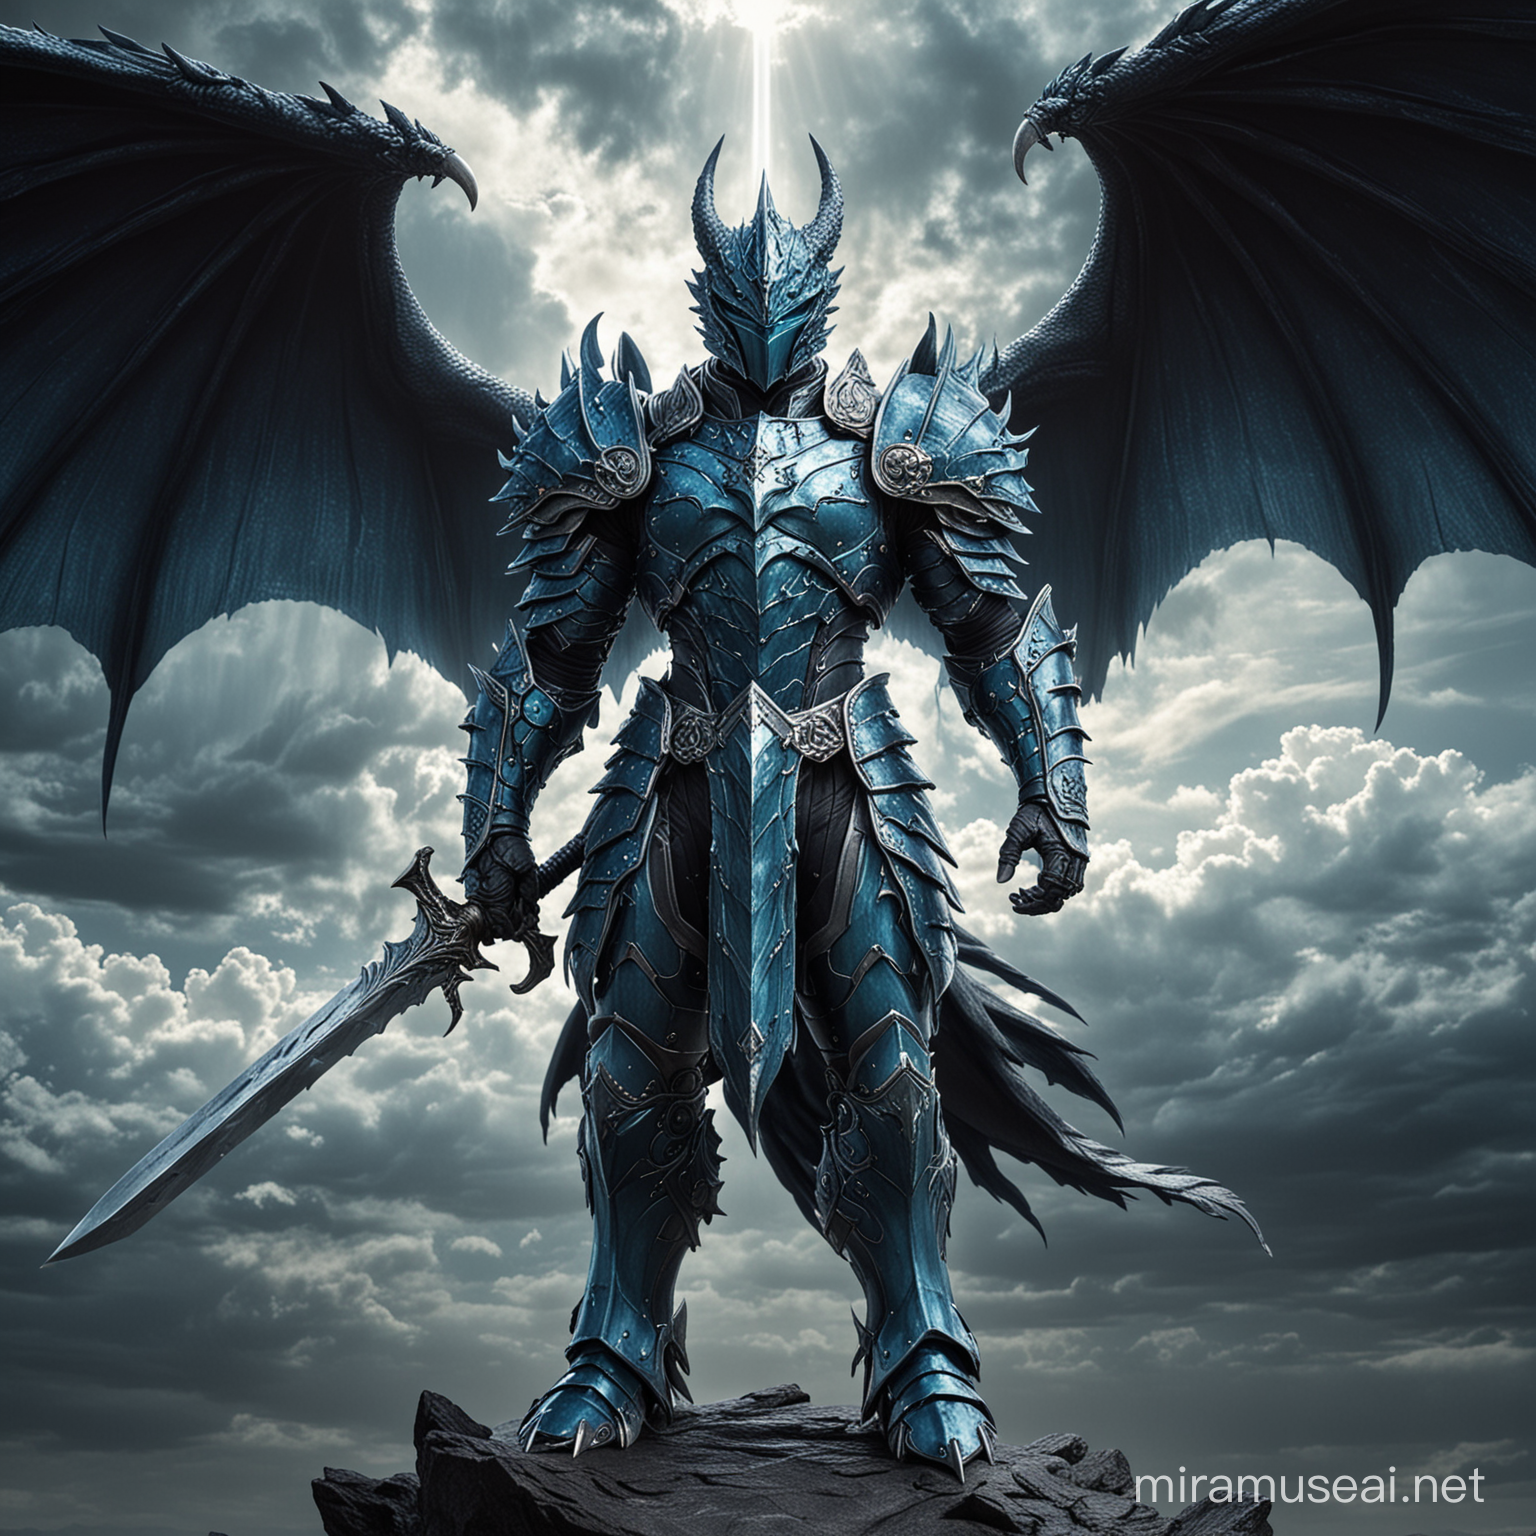 Draconian knight, dragonoid human angel, seraph, draco scaley skin, blueish hue, dark texture, muscular build, dragon tail, angelic dragon armor, standing 11 ft tall, holding a sword and shield, dark clouds